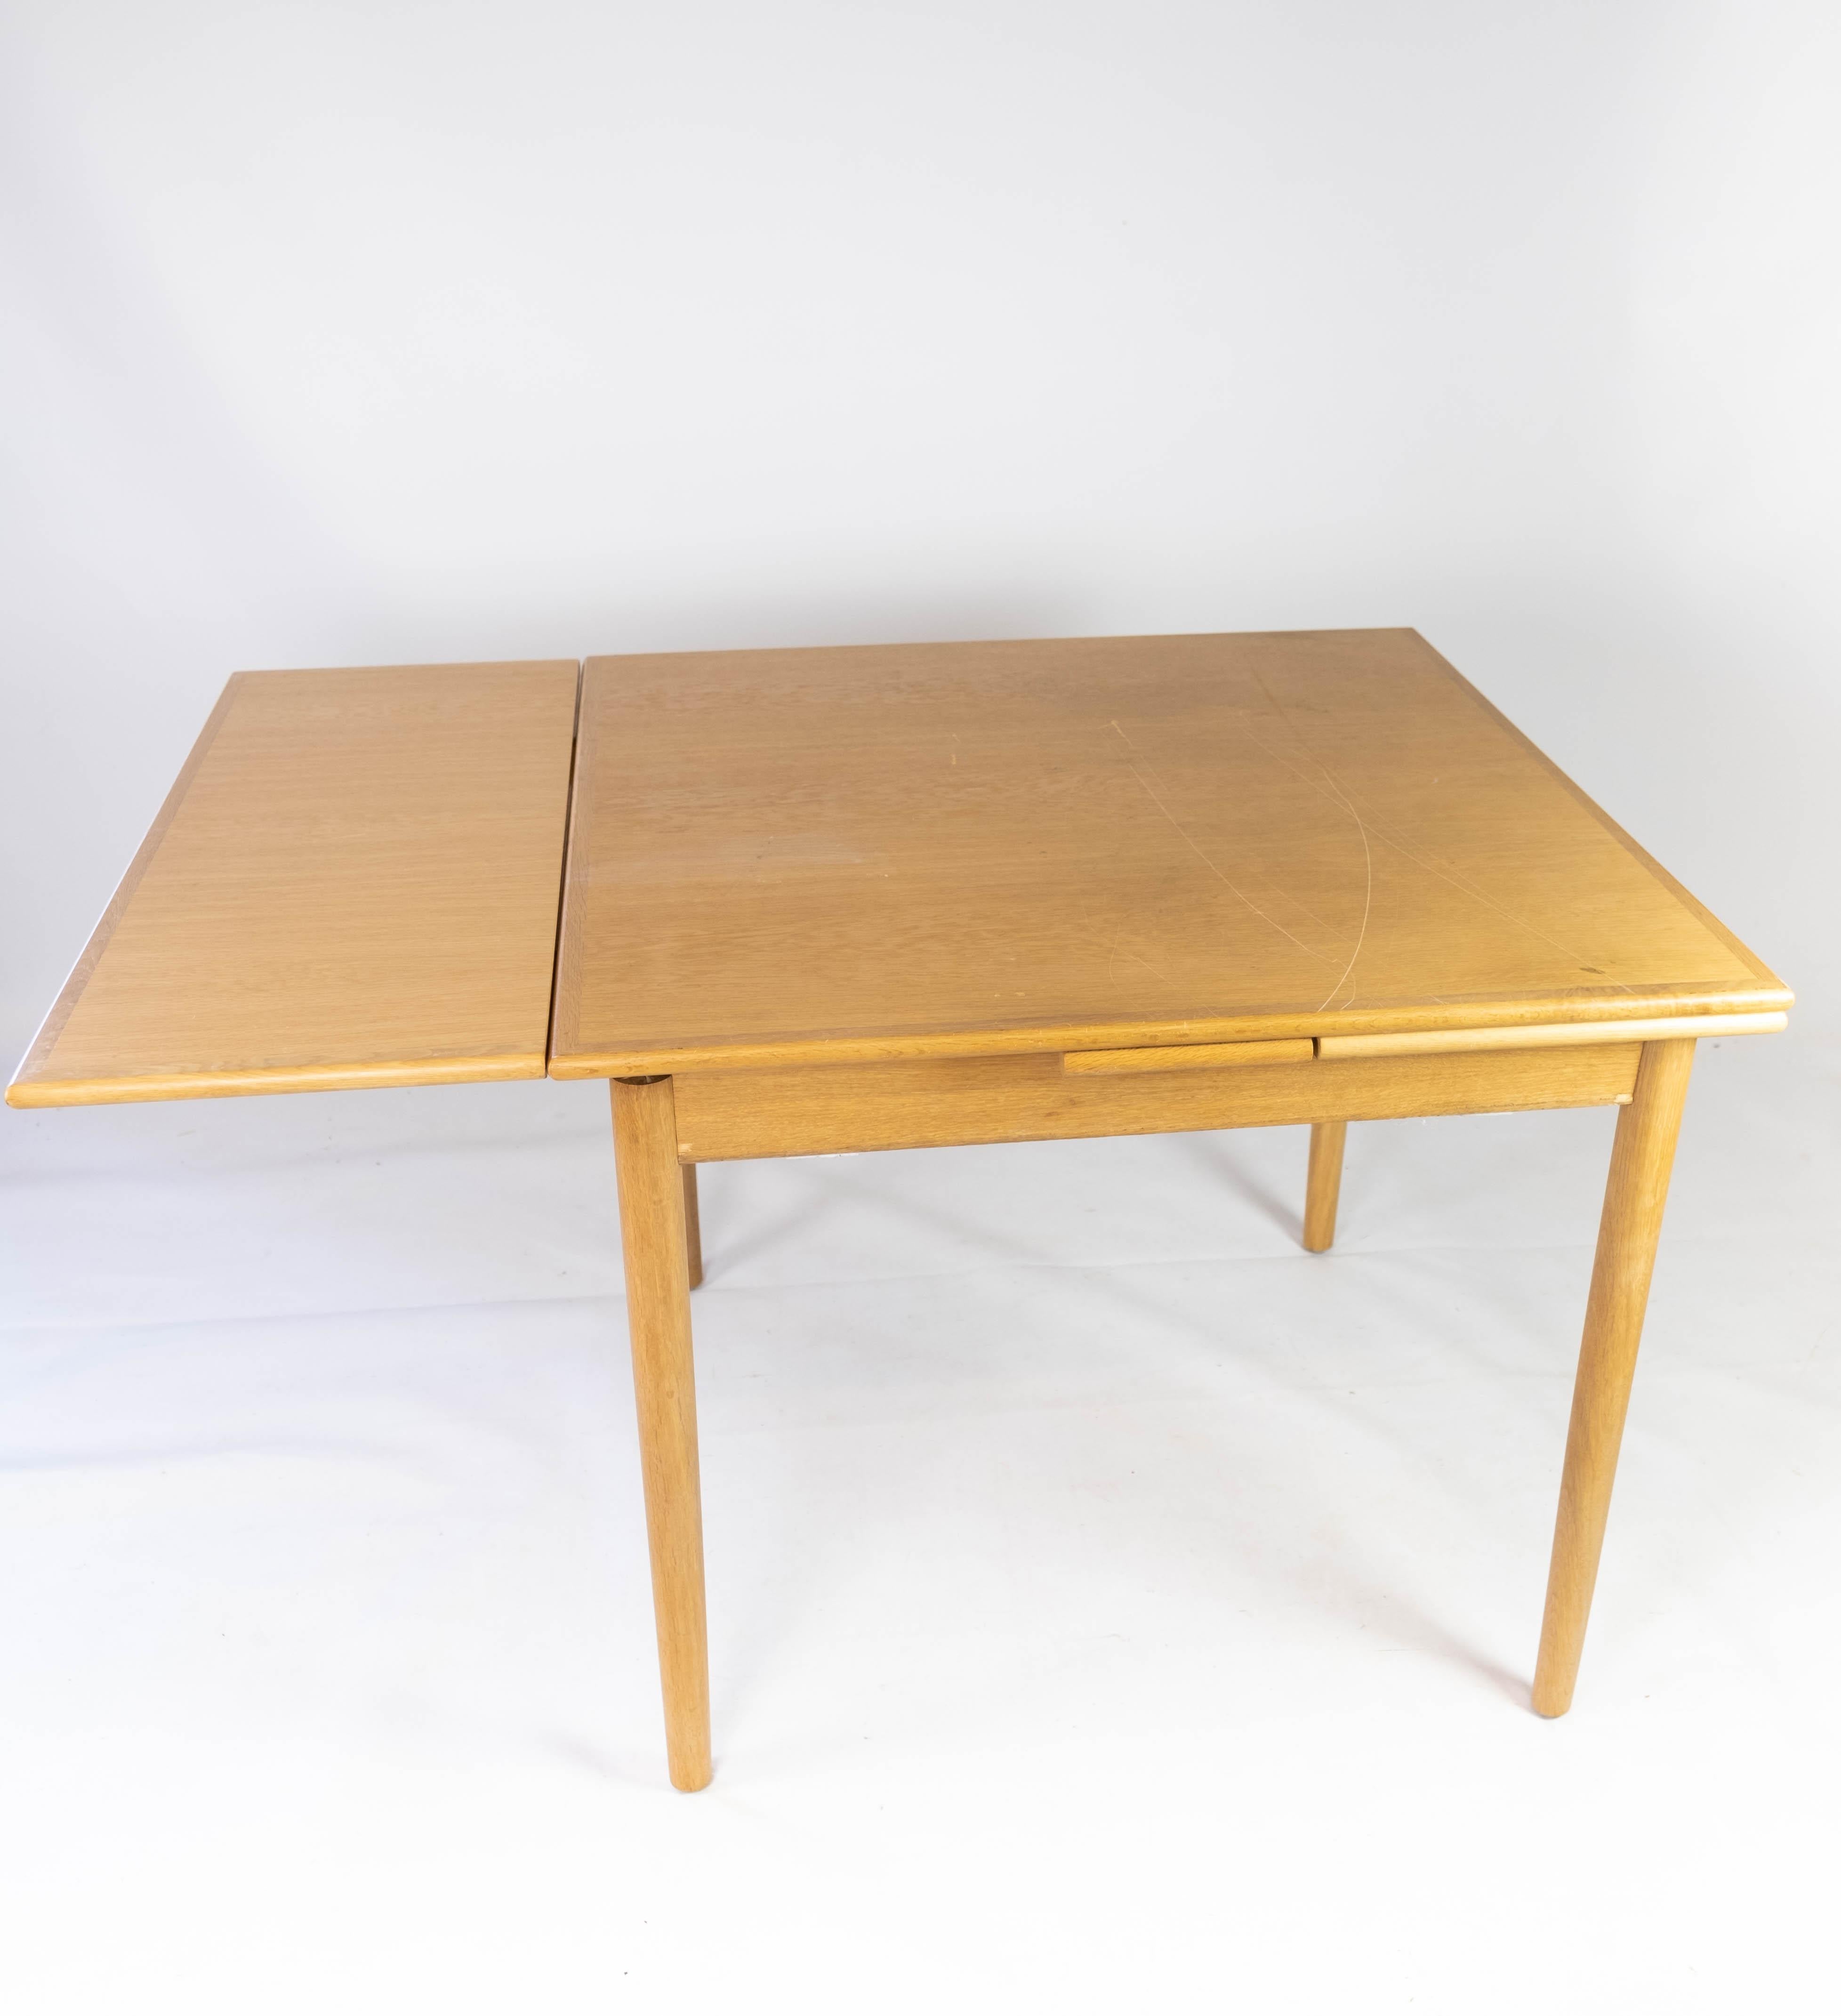 Mid-20th Century Dining Table Made In Oak With Extensions, Danish Design From 1960s For Sale